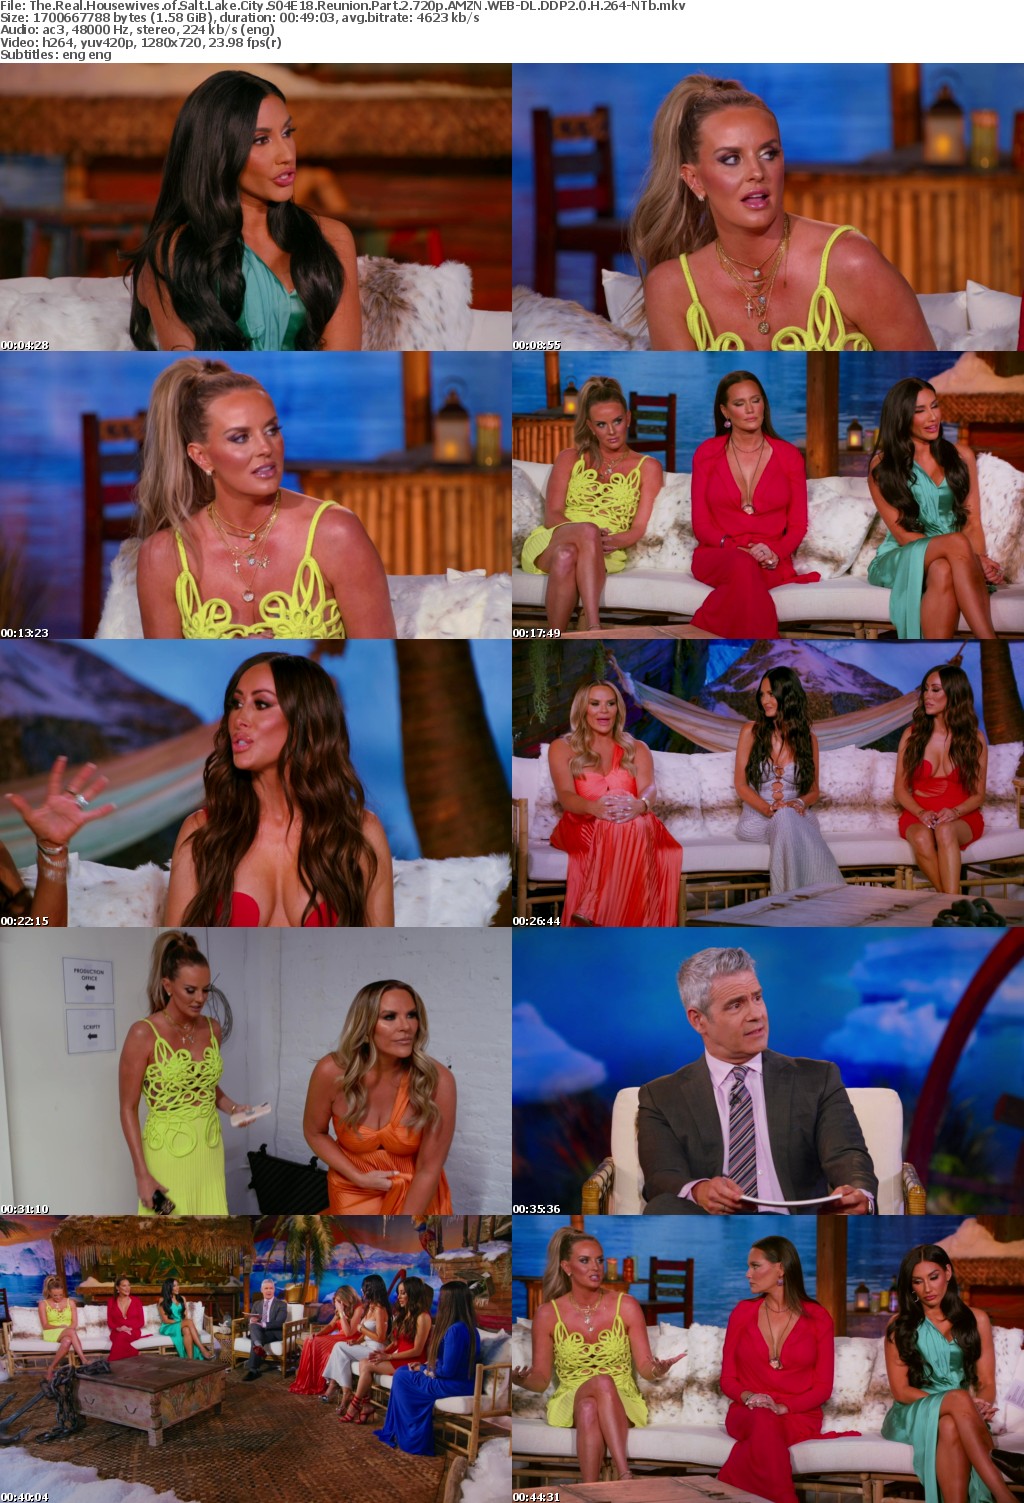 The Real Housewives of Salt Lake City S04E18 Reunion Part 2 720p AMZN WEB-DL DDP2 0 H 264-NTb